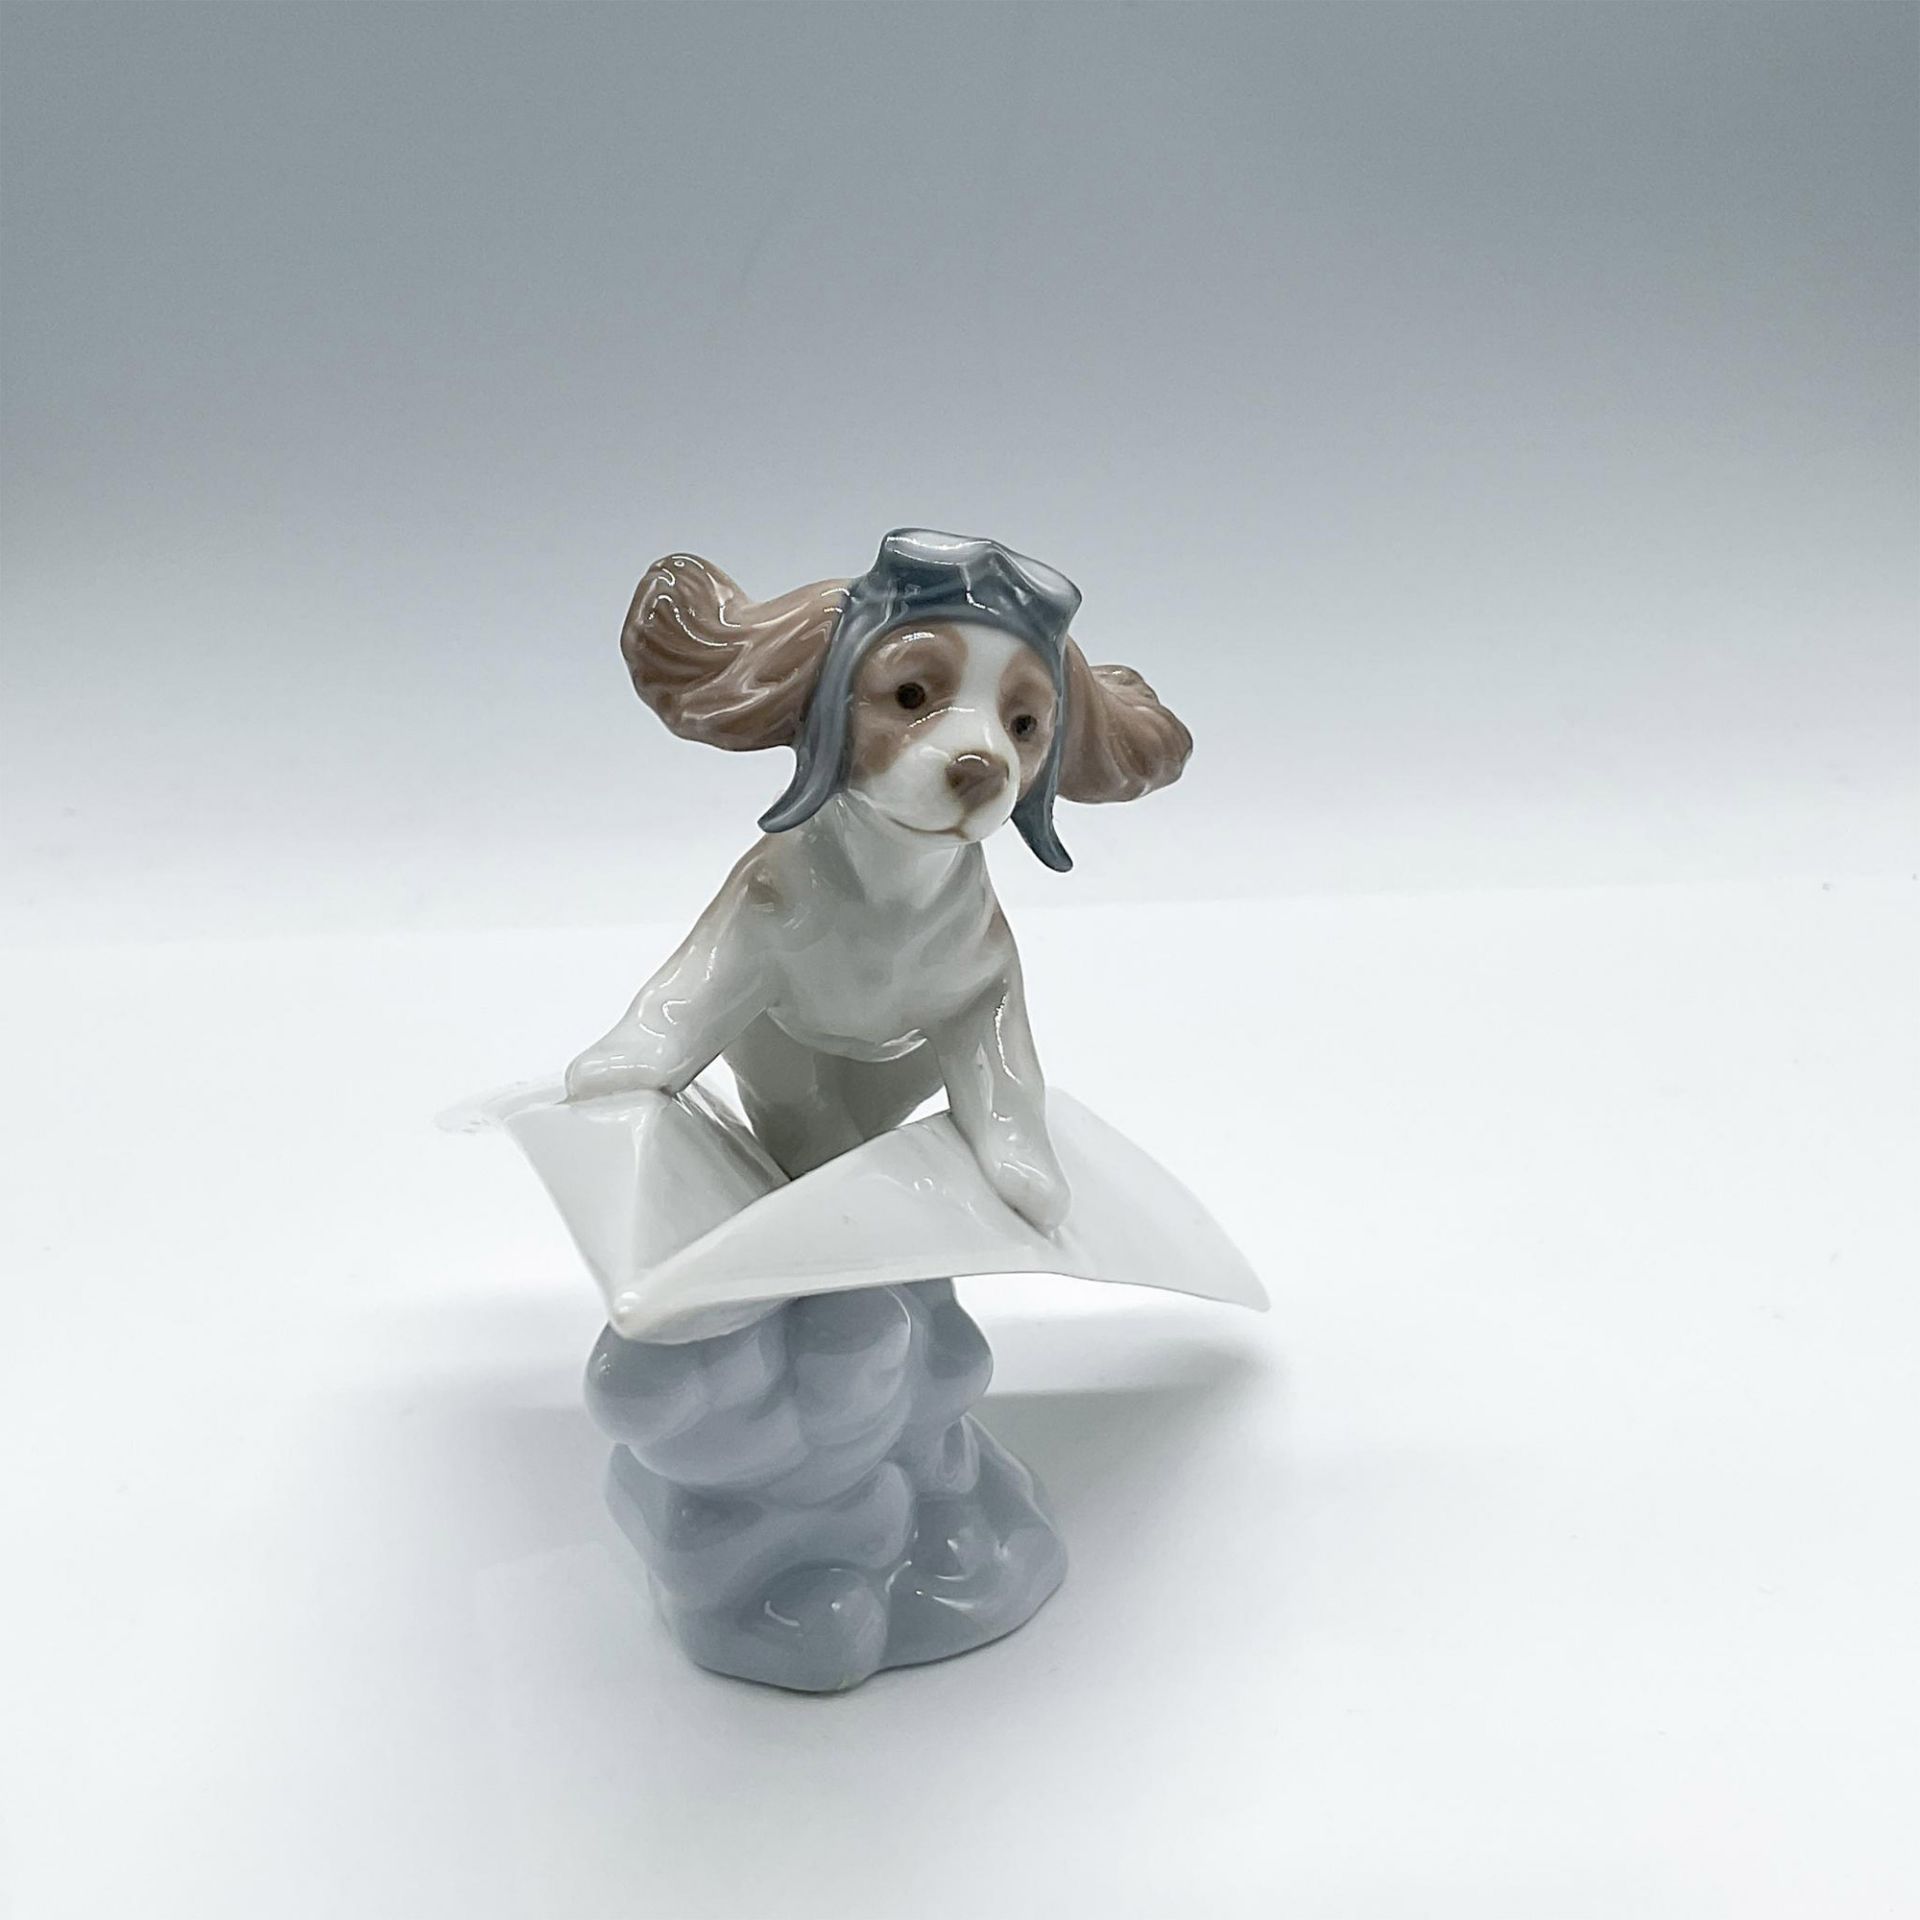 Lets Fly Away 1006665 - Lladro Porcelain Figurine - Image 4 of 5